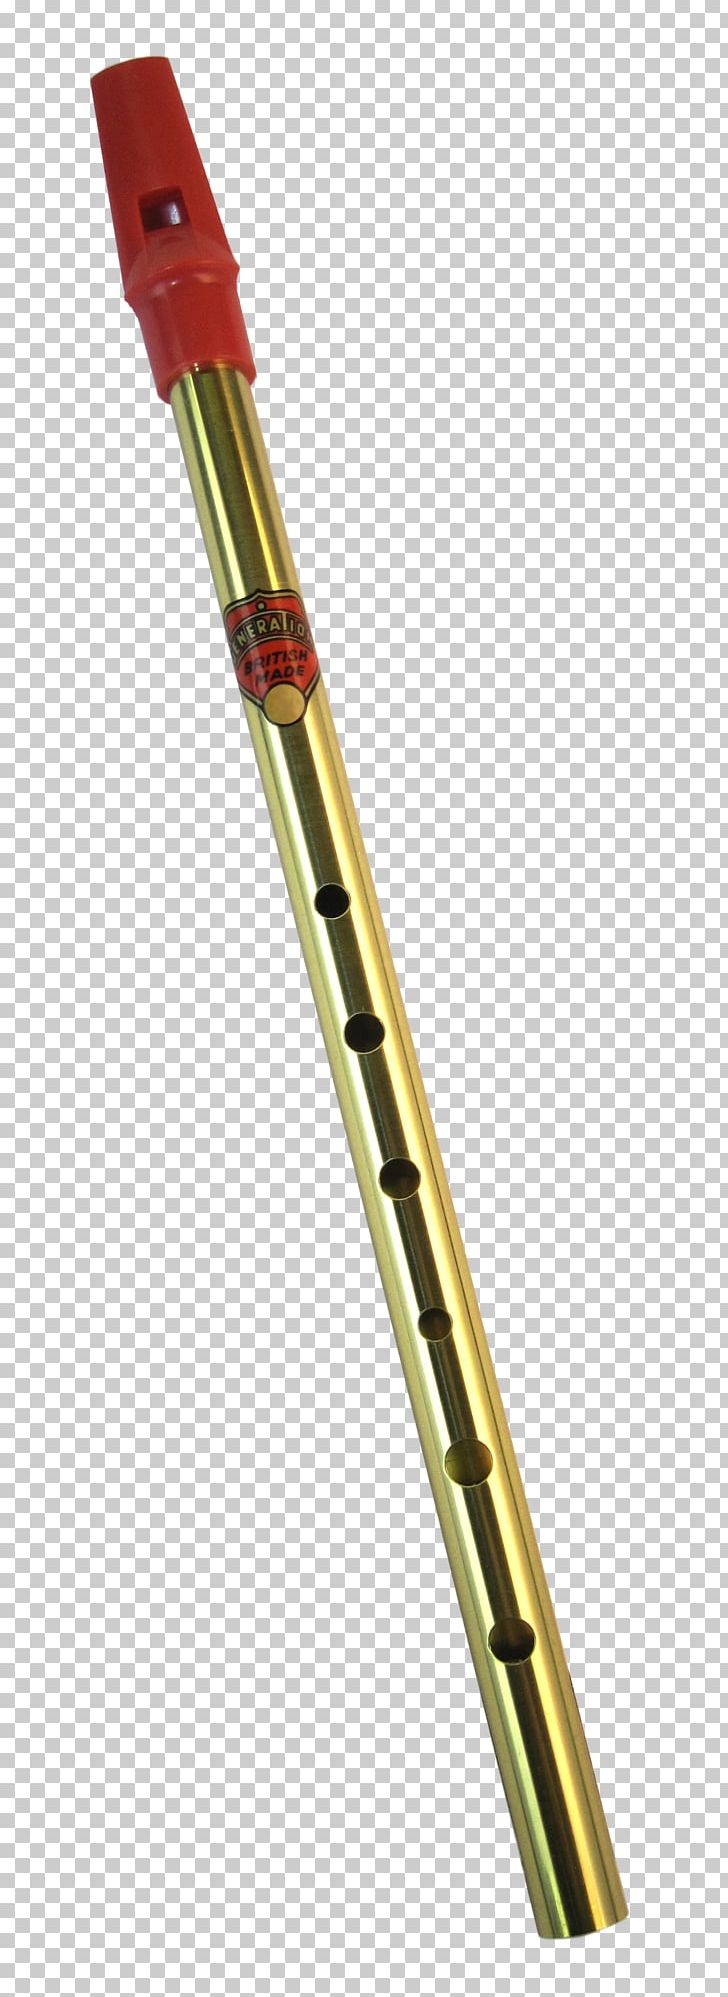 Tin Whistle Mouthpiece Flute Flageolet PNG, Clipart, Brass, England, Flageolet, Flute, Mouthpiece Free PNG Download